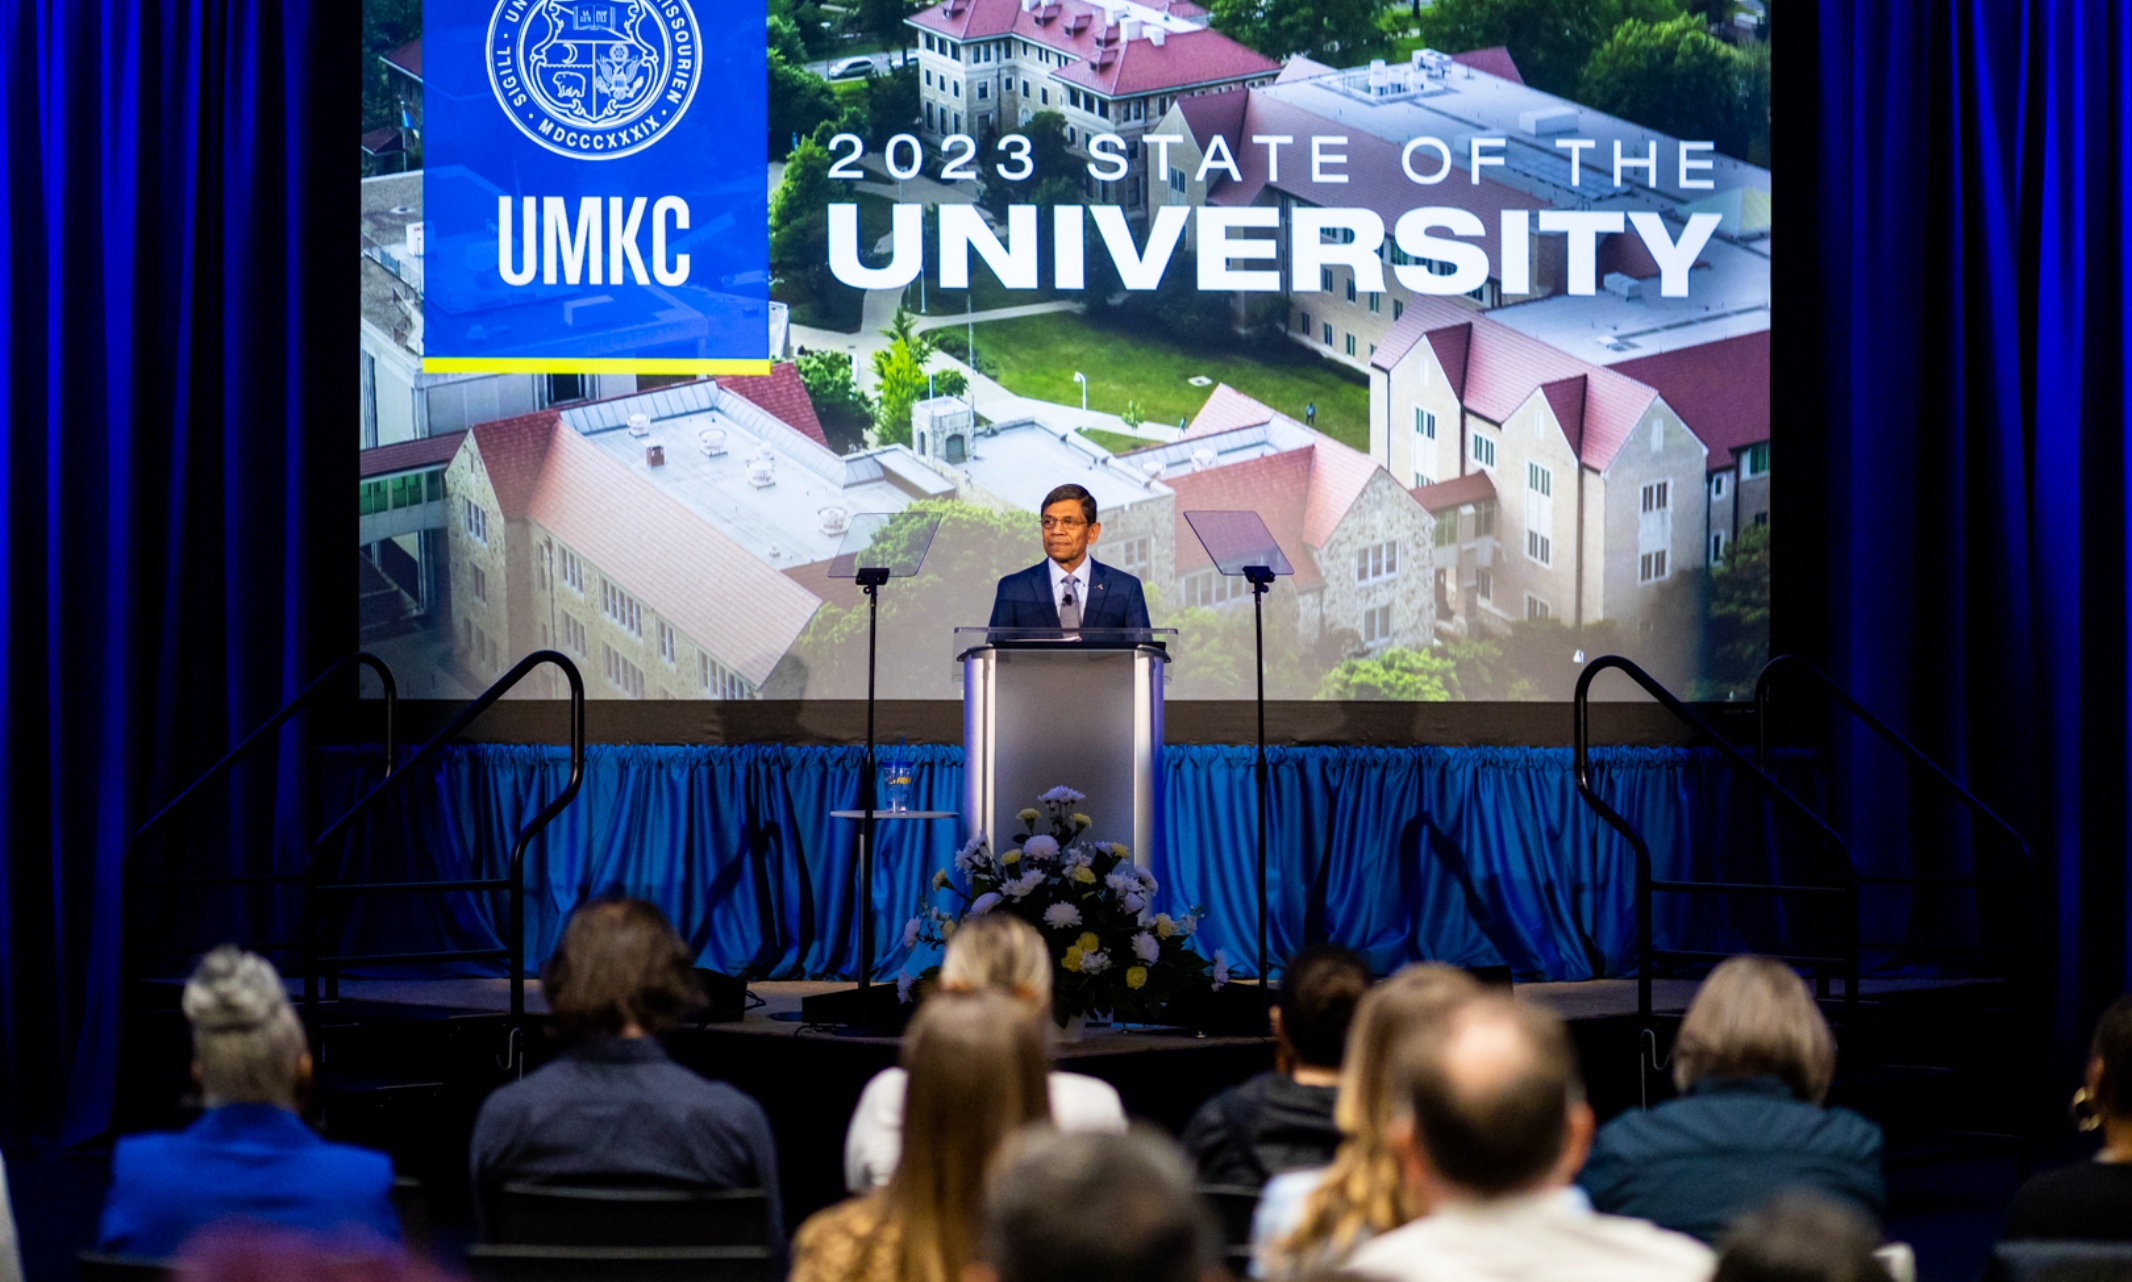 Chancellor C. Mauli Agrawal stands in front of a crowd. Behind him an aerial view of campus is displayed on a screen with "State of the University and the UMKC Seal imposed on the foreground